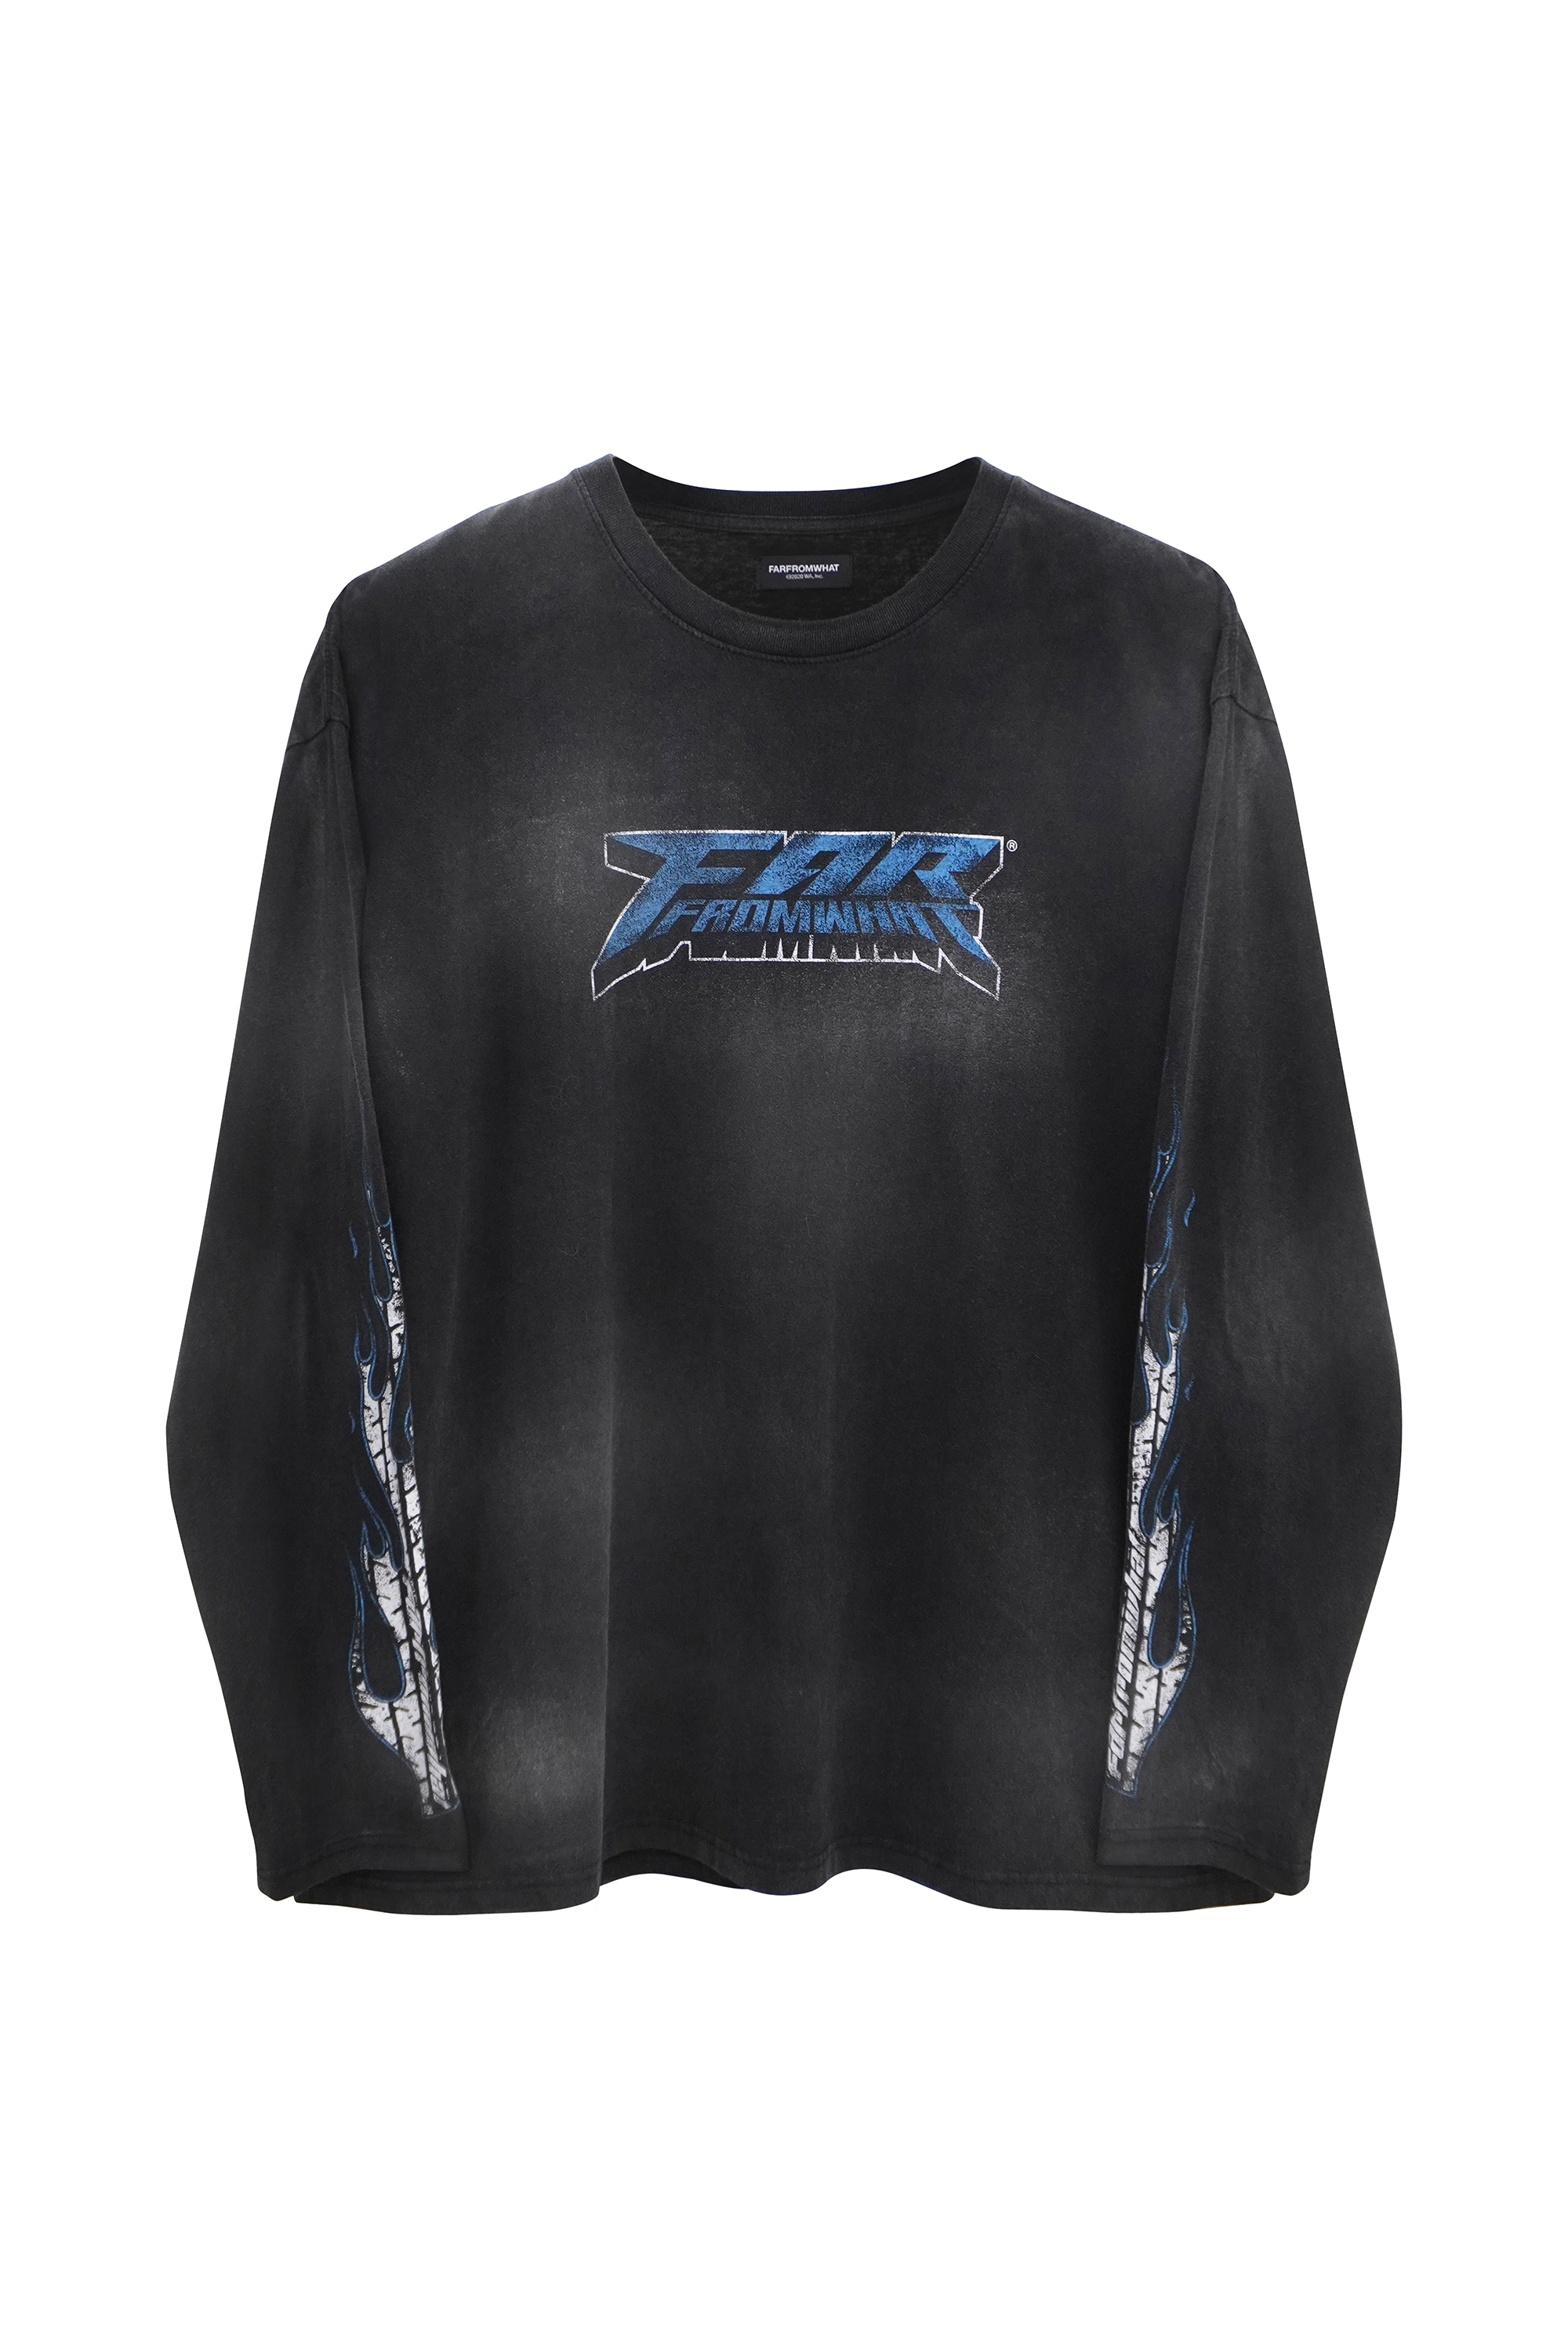 FAR WASHED FLAME LONG SLEEVES_BLACK